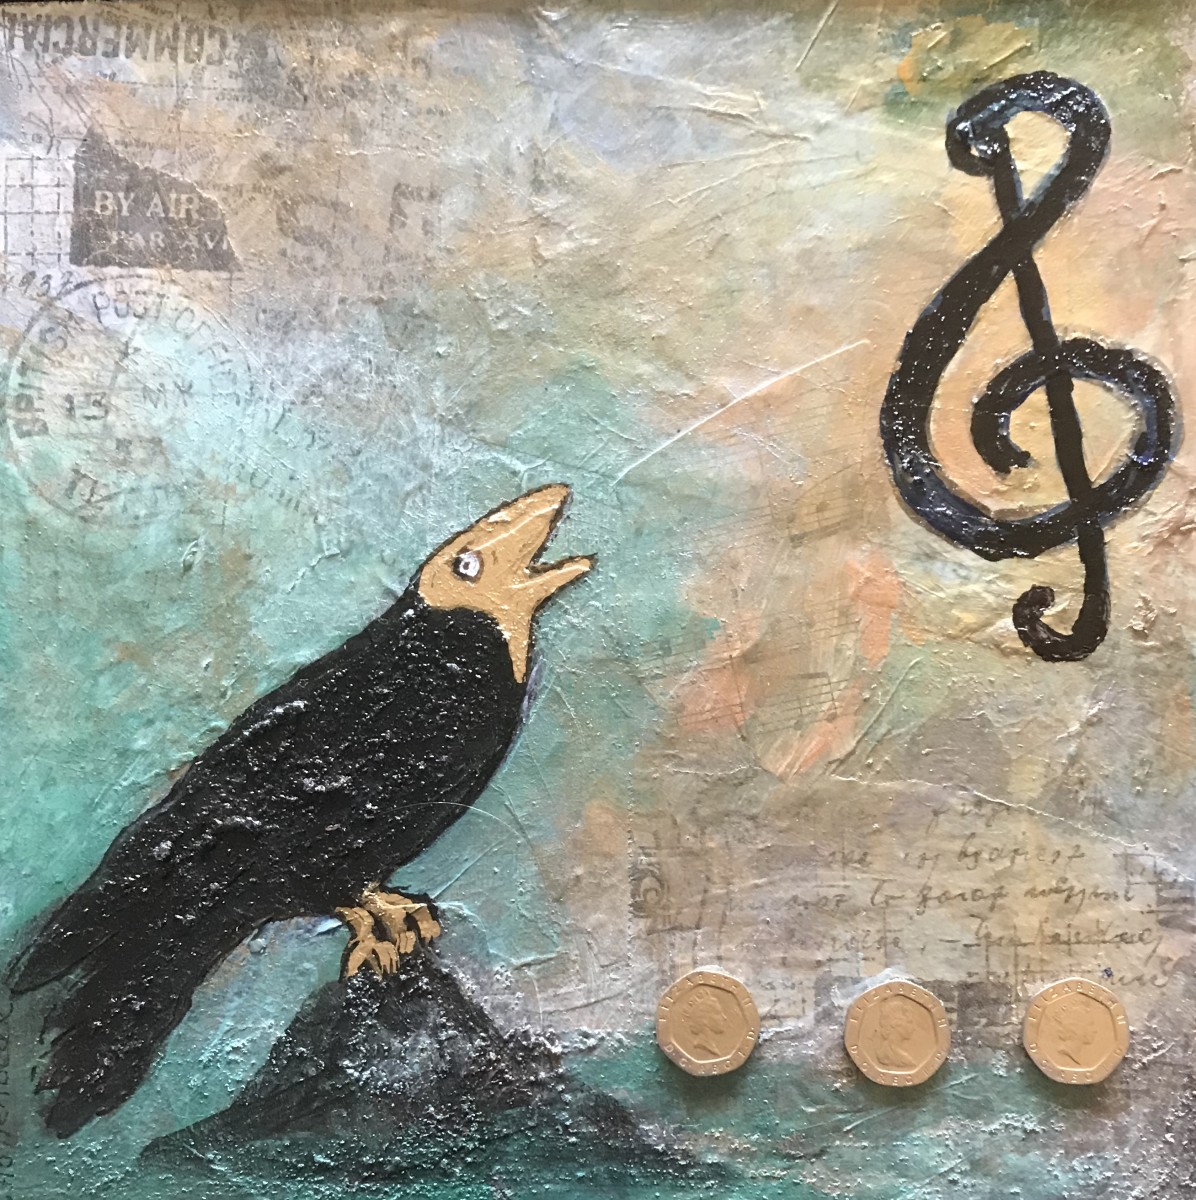 SING A SONG OF SIXPENCE by Phyllis Hollenbeck 